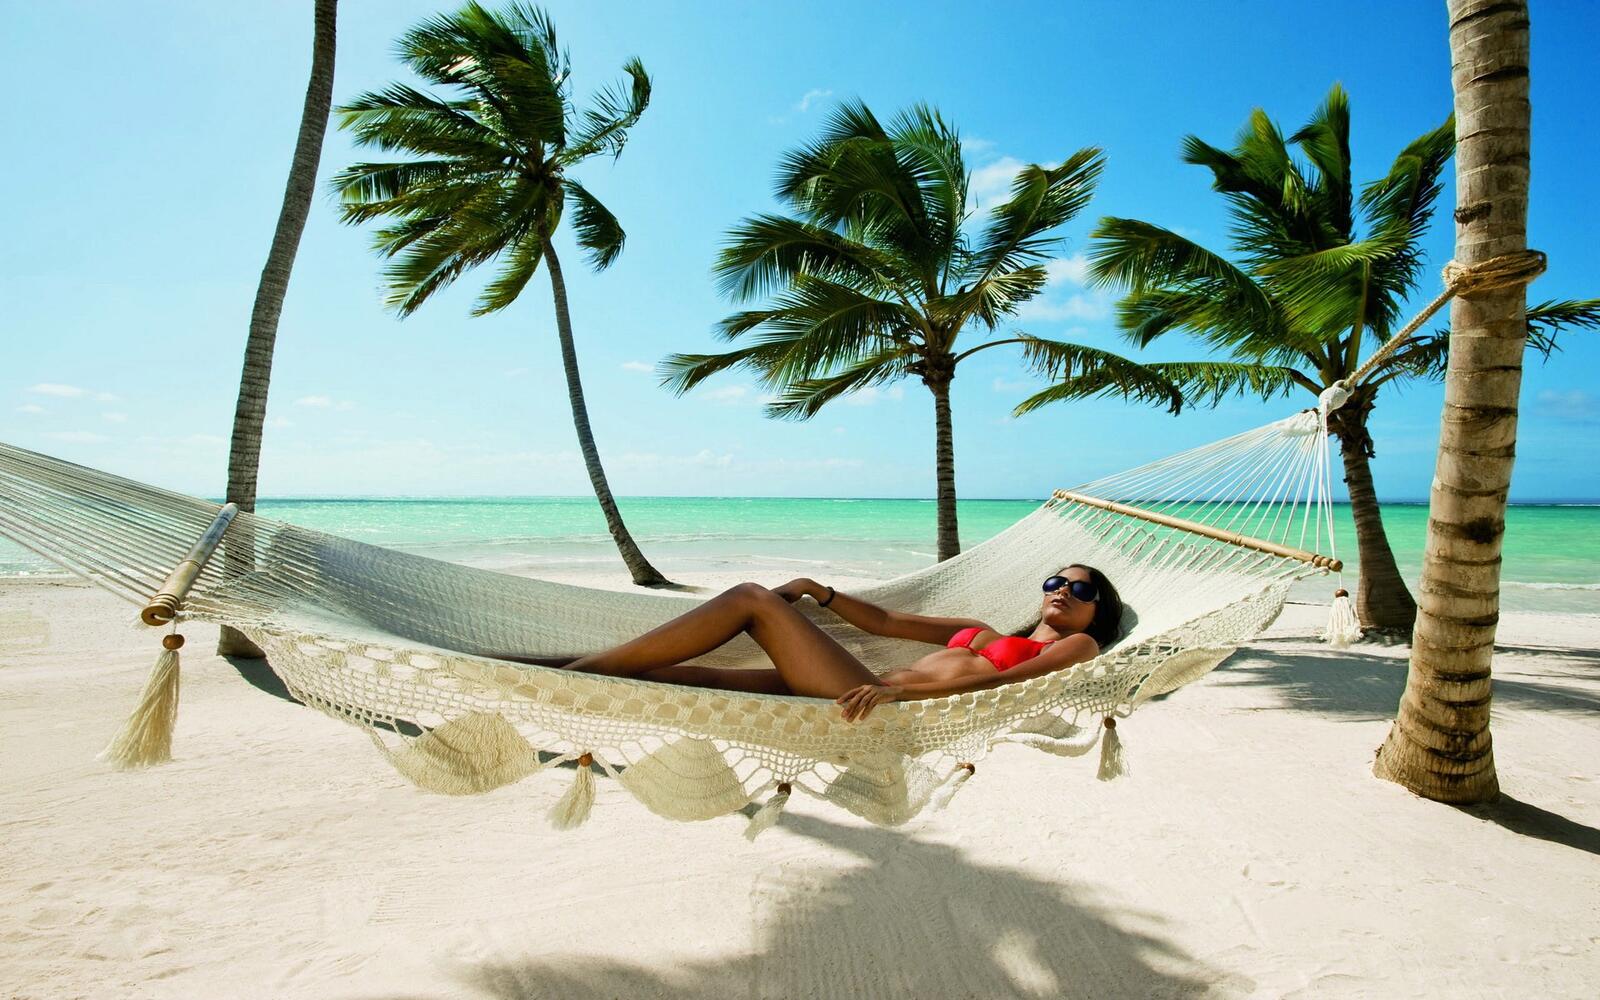 Free photo Sunbathing on a hammock tied to palm trees on the beach.